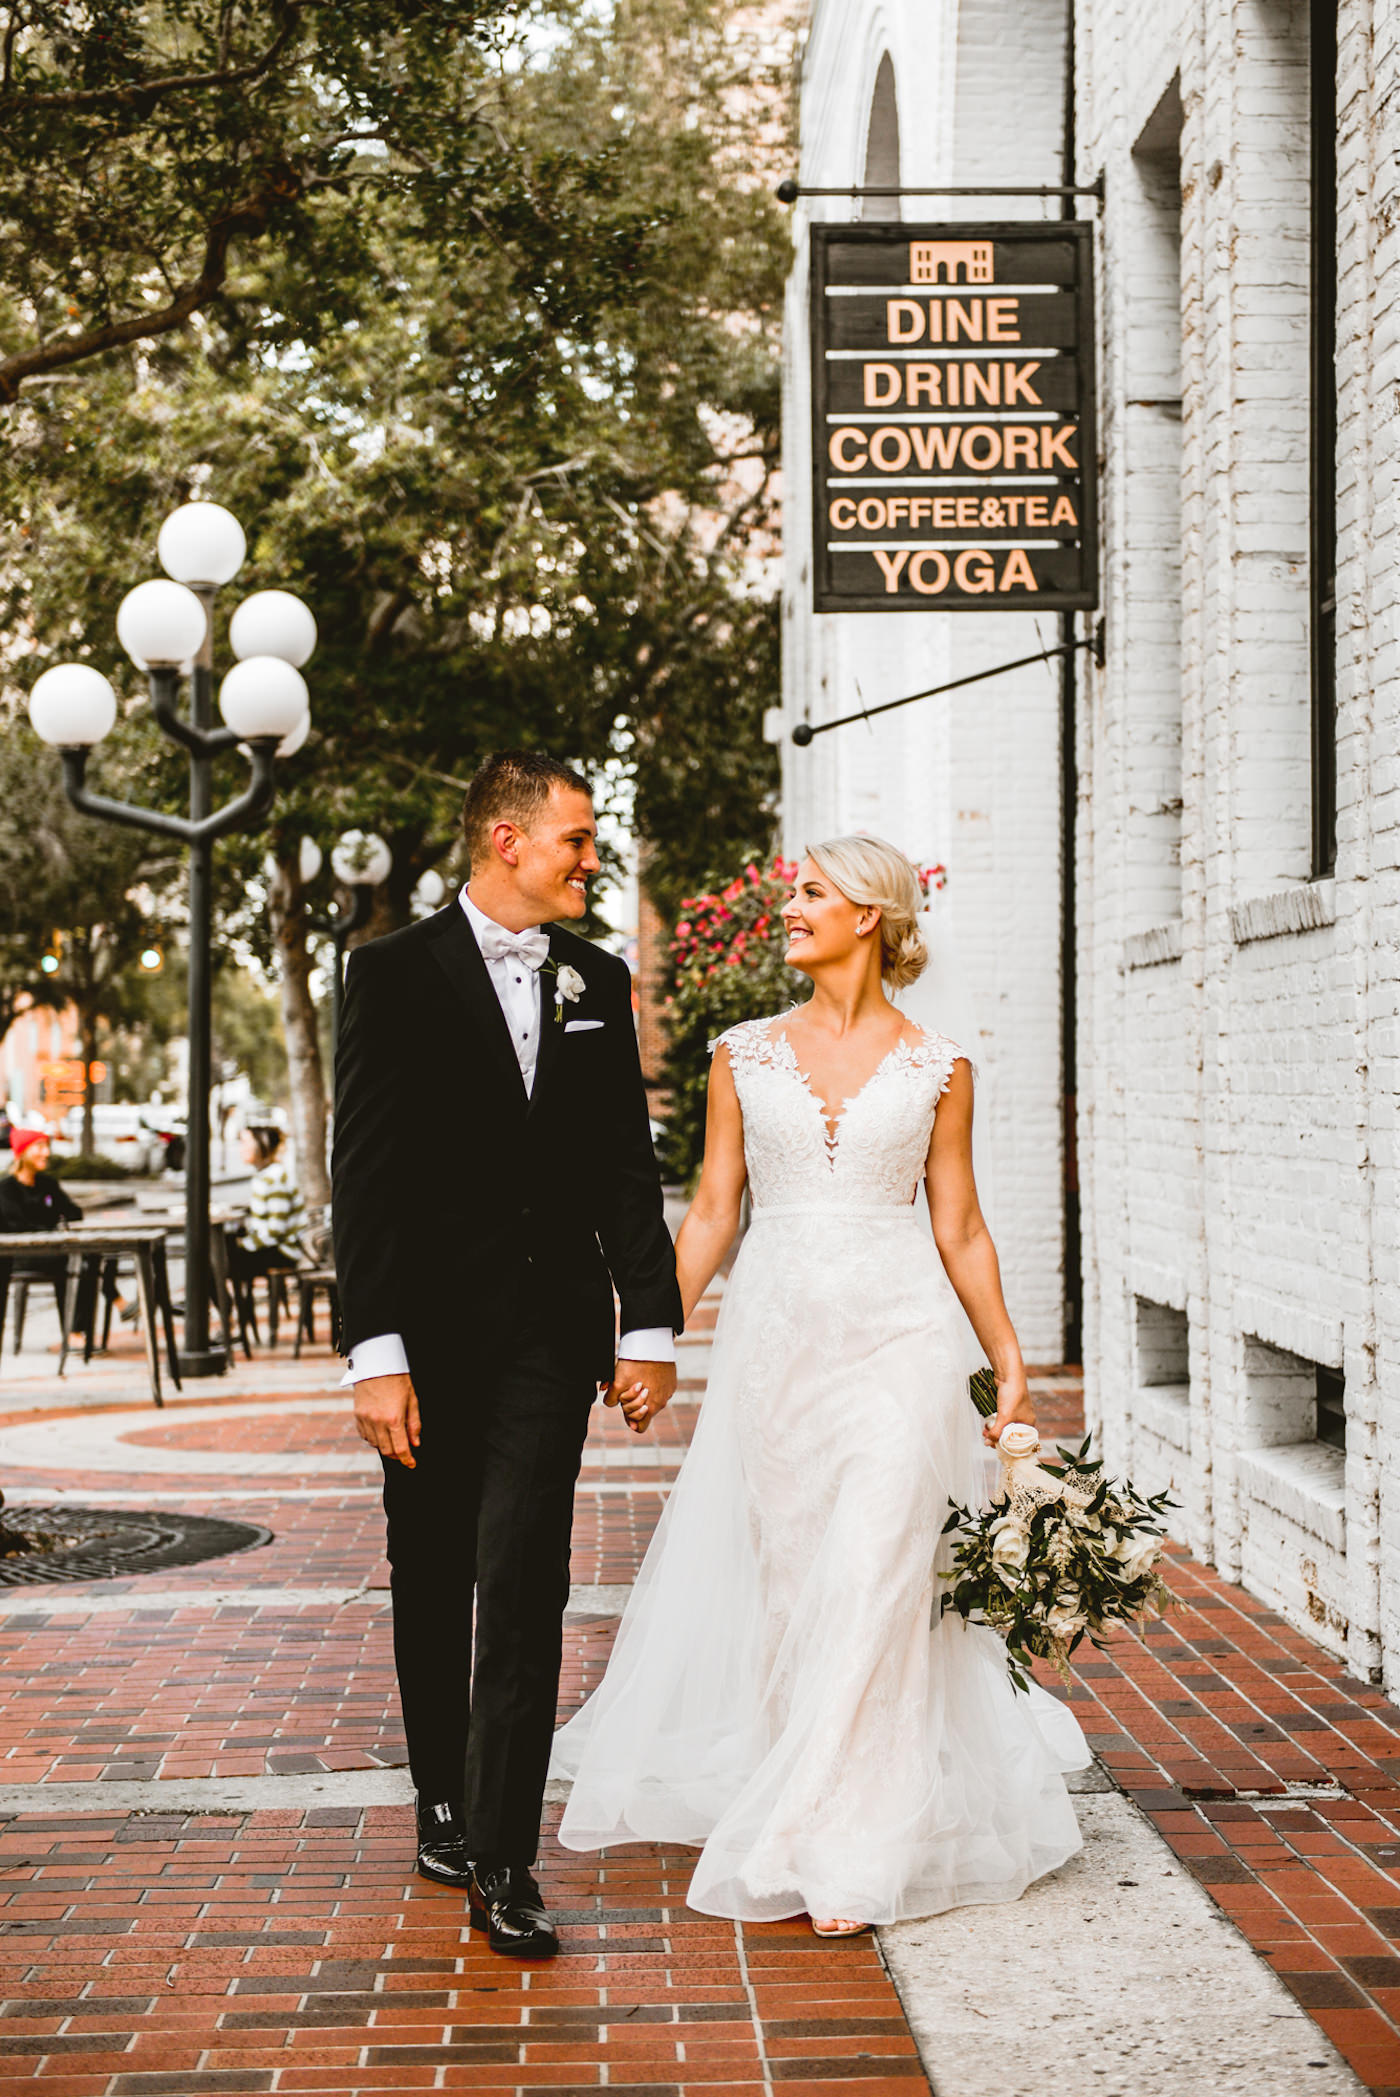 Bride and Groom Outdoor Downtown St. Pete Wedding Portraits | Ivory Morilee Lace and Tulle A Line Bridal Gown with Illusion Lace Cap Sleeve and Cathedral Veil | Groom in Classic Black Tuxedo Suit | Natural Neutral Wedding Bridal Bouquet with White Roses and Ivory Spray Tea Roses and Astilbe Accented with Olive Leaf Greenery | St. Pete Wedding Venue Station House